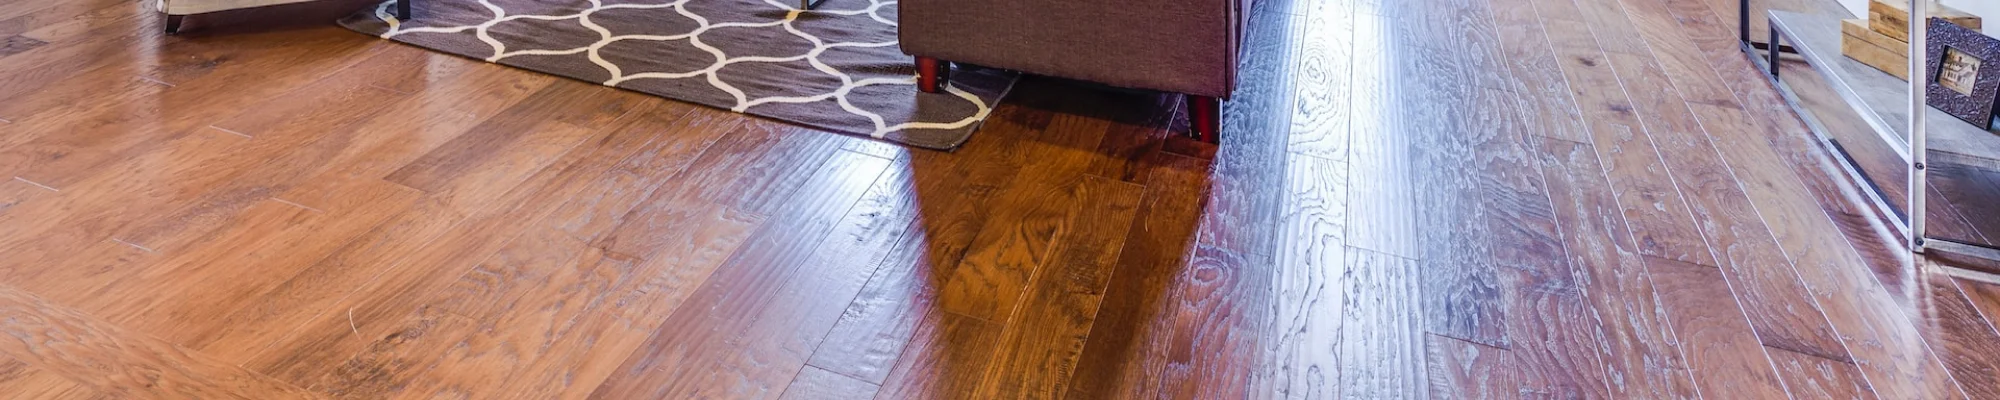 All about hardwood flooring from your local flooring store | Sistare Carpets & Flooring  in Lancaster, SC